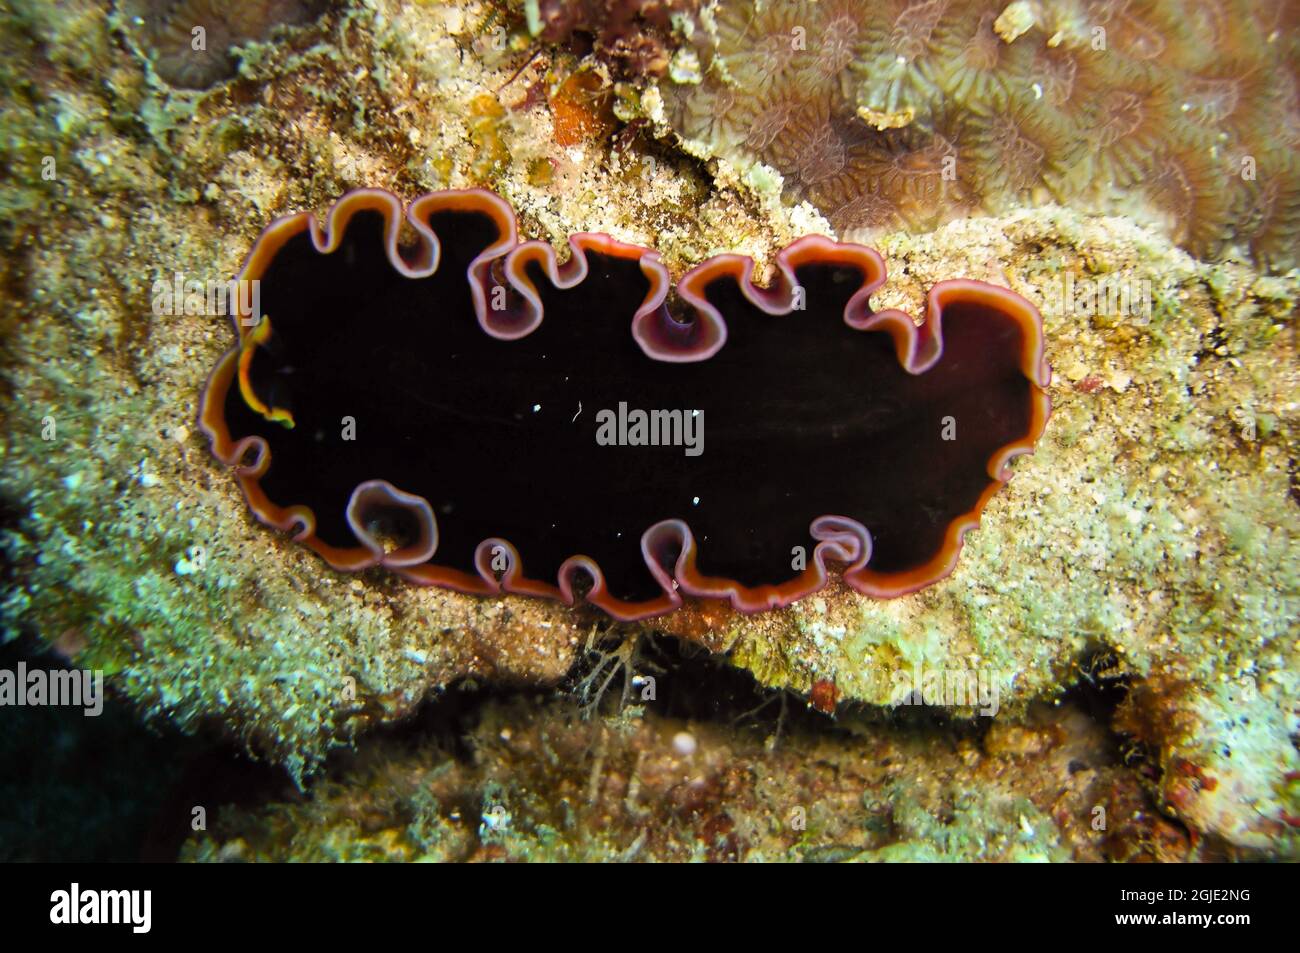 Black Platworm (Platyhelminthes) on the ground in the filipino sea January 18, 2012 Stock Photo